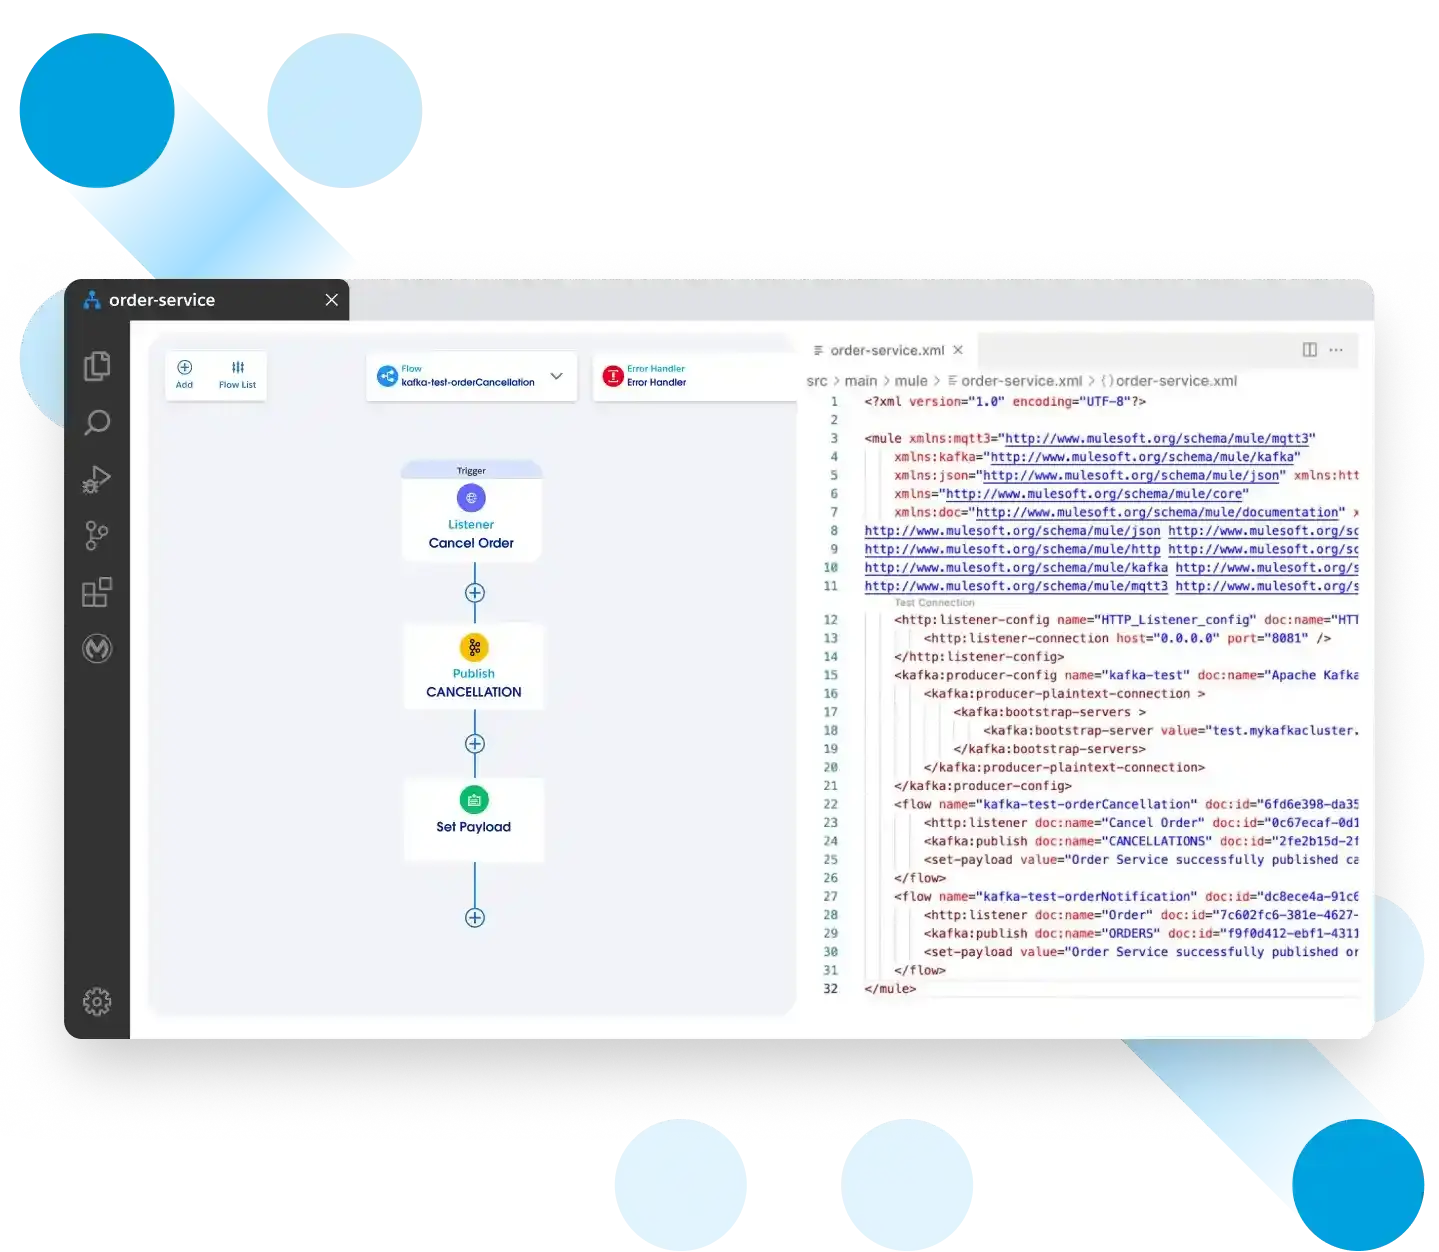 A graphic showing how to implement event-driven applications using MuleSoft’s IDEs.